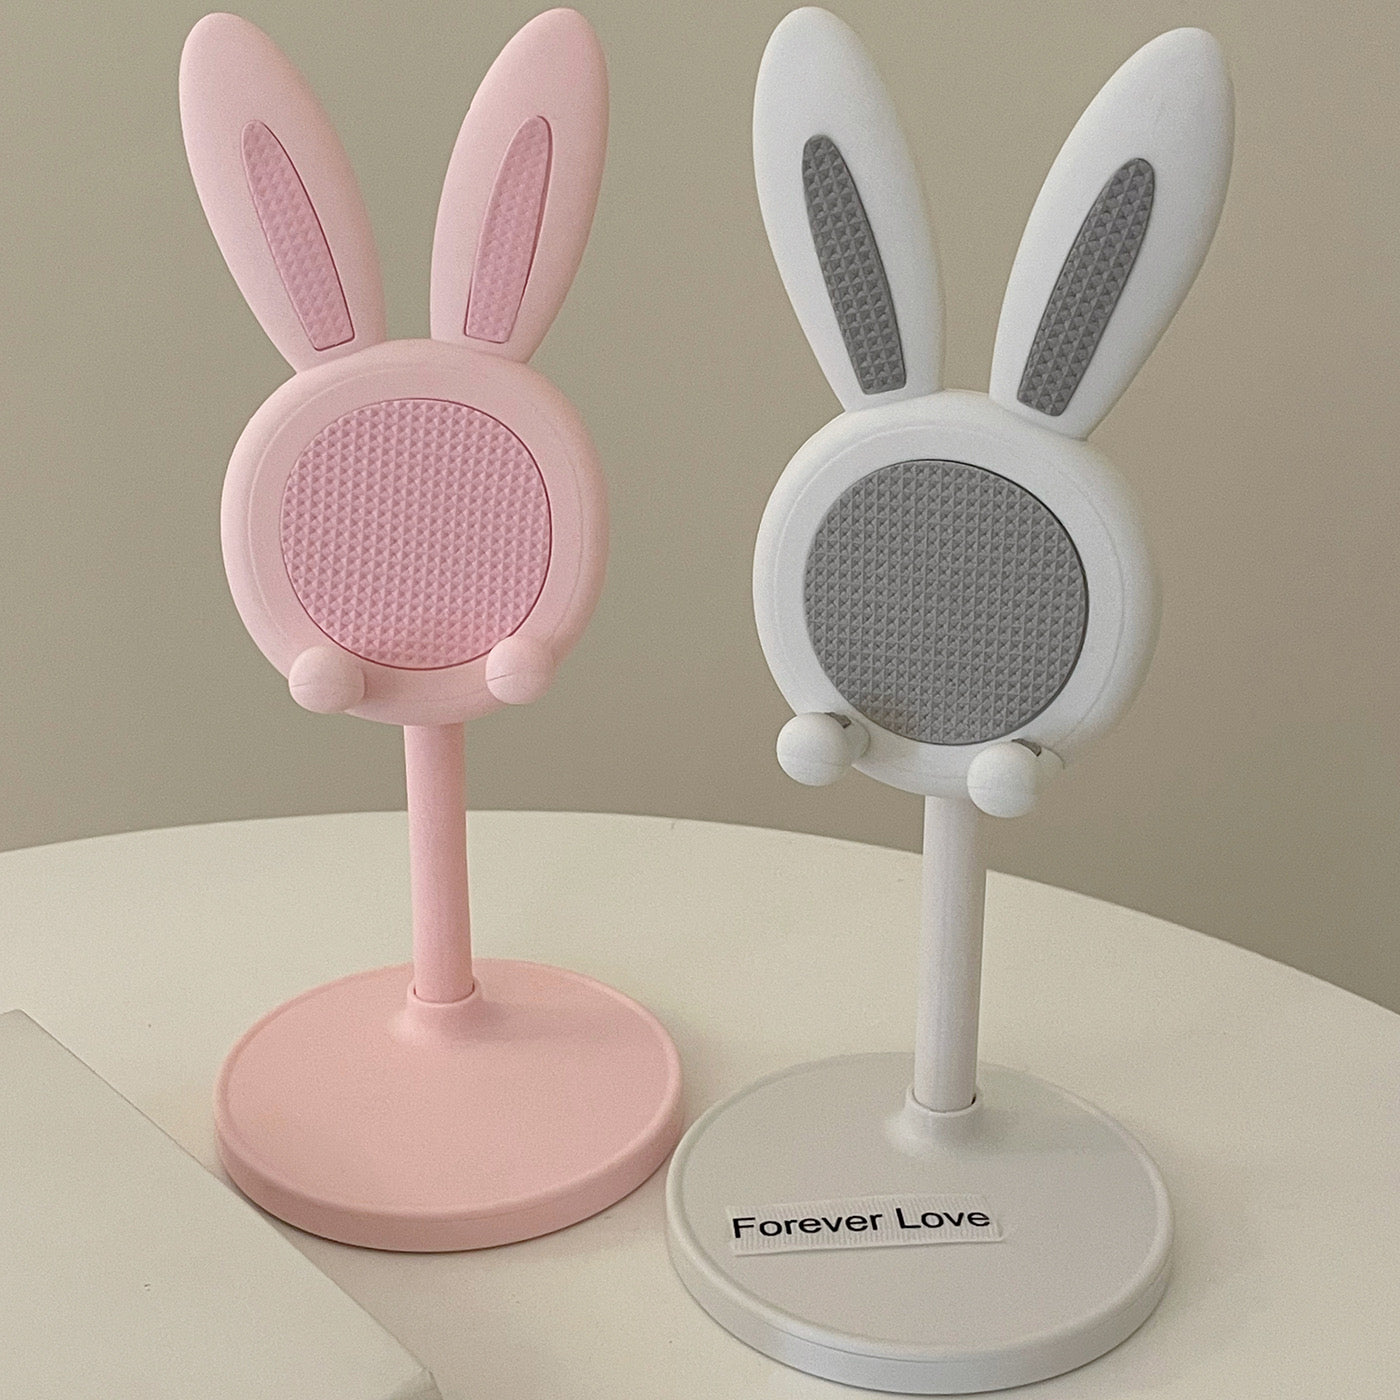 Bunny Adjustable Height Portable Phone Stand